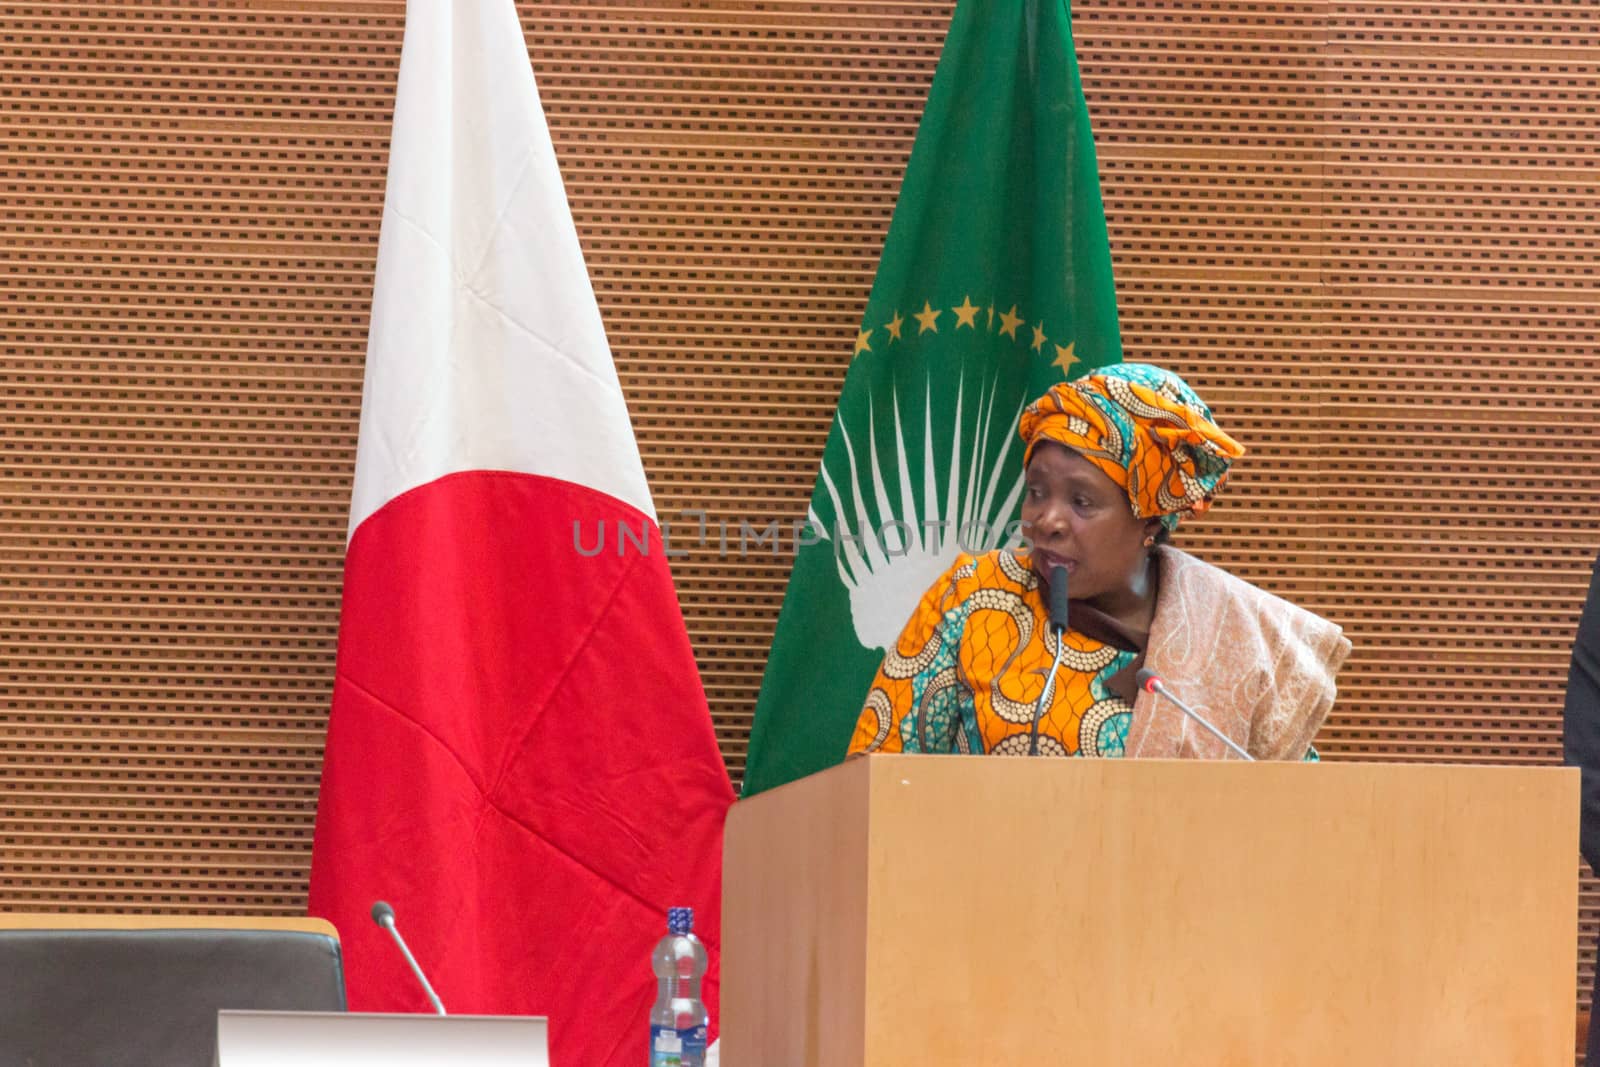 H.E. Dr. Nkosazana Dlamini-Zuma, Chairperson of the African Union Commission delivers a a speech on the occasion of Japan Prime Minister’s visit to Ethiopia, on January 14, 2014, at the African Union Headquarters in Addis Ababa, Ethiopia.